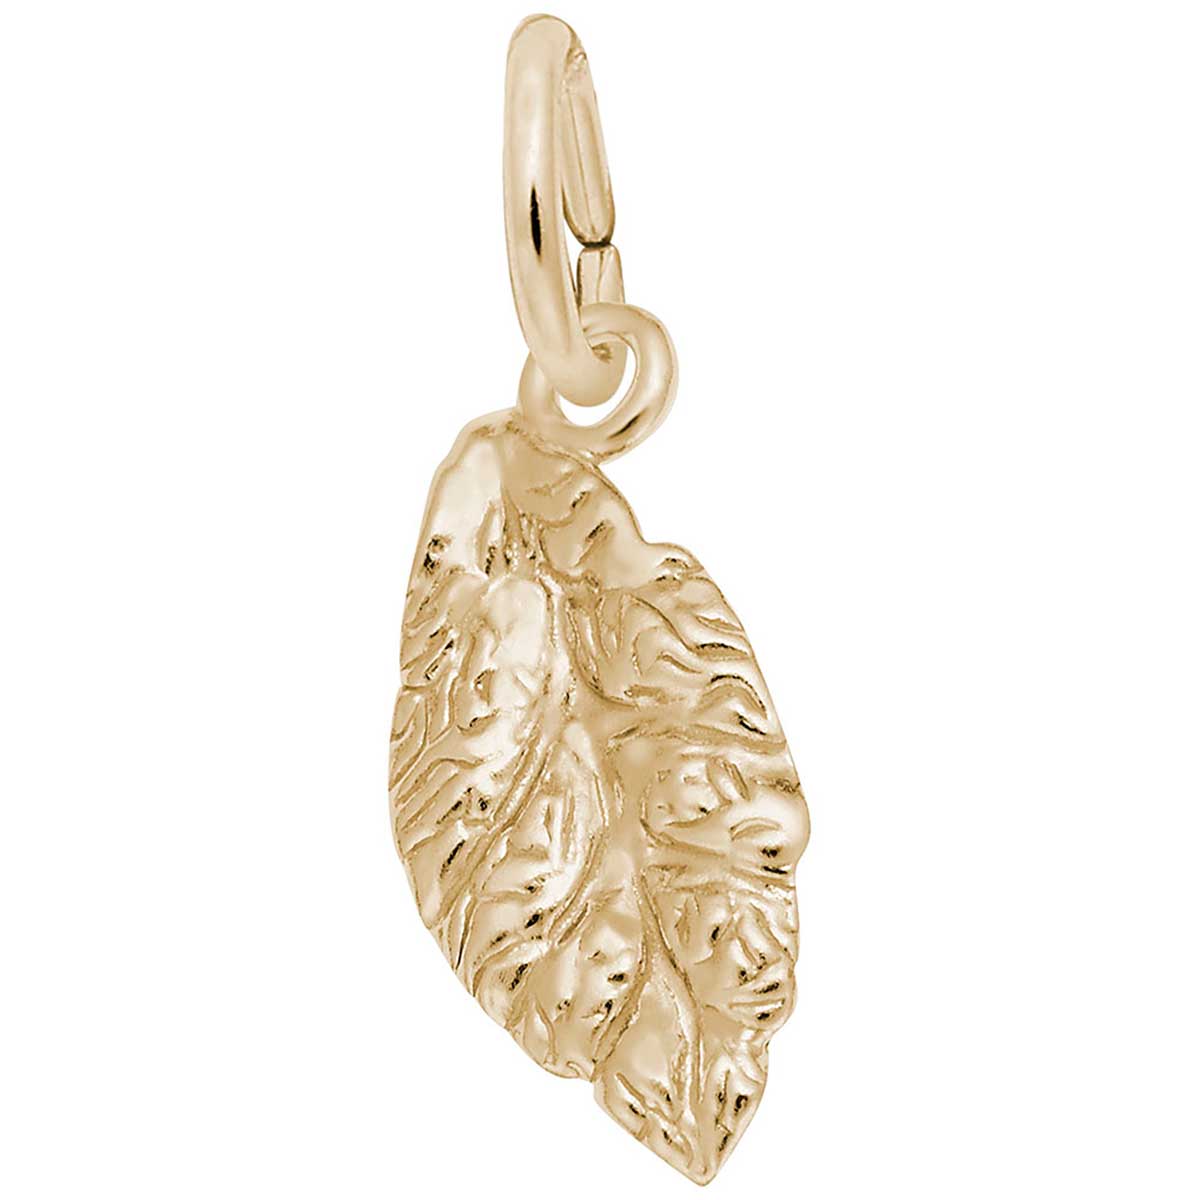 Rembrandt Tobacco Leaf Charm, 14K Yellow Gold